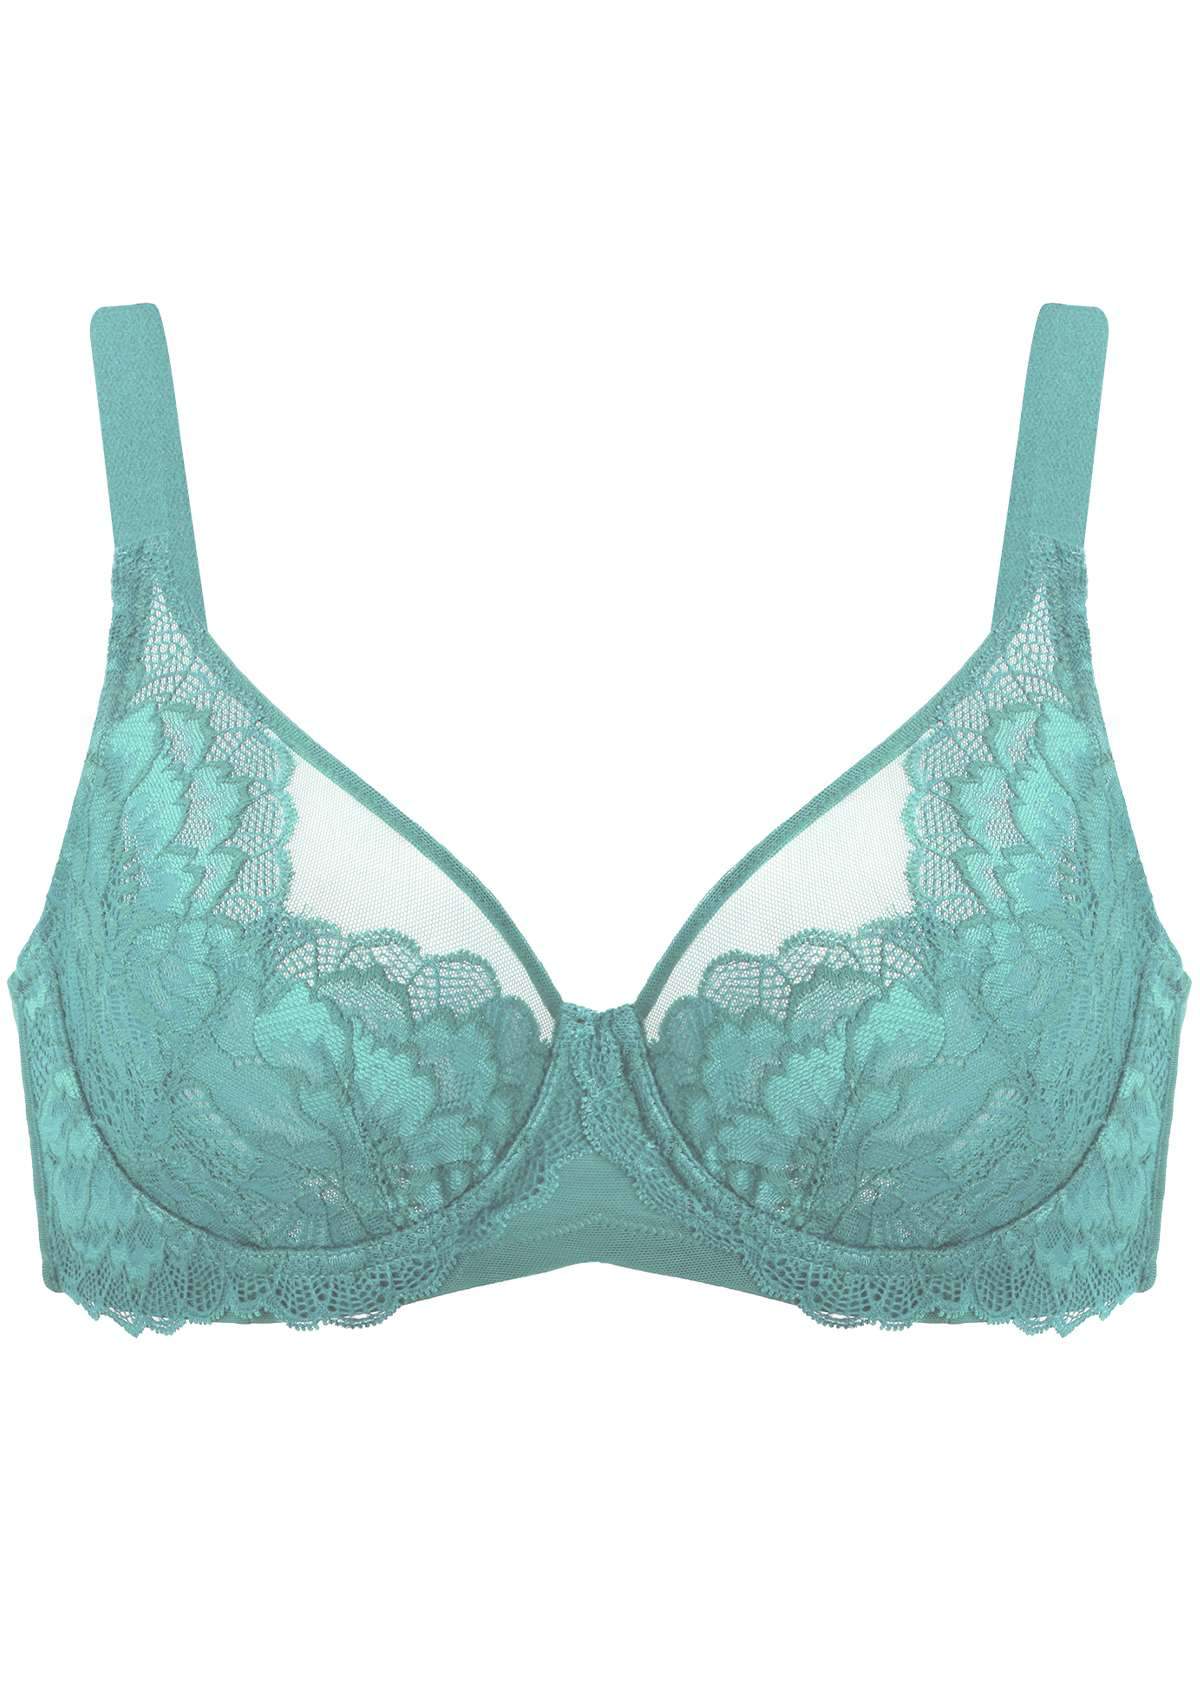 HSIA Peony Lace Unlined Supportive Underwire Bra - Light Coral / 34 / DDD/F